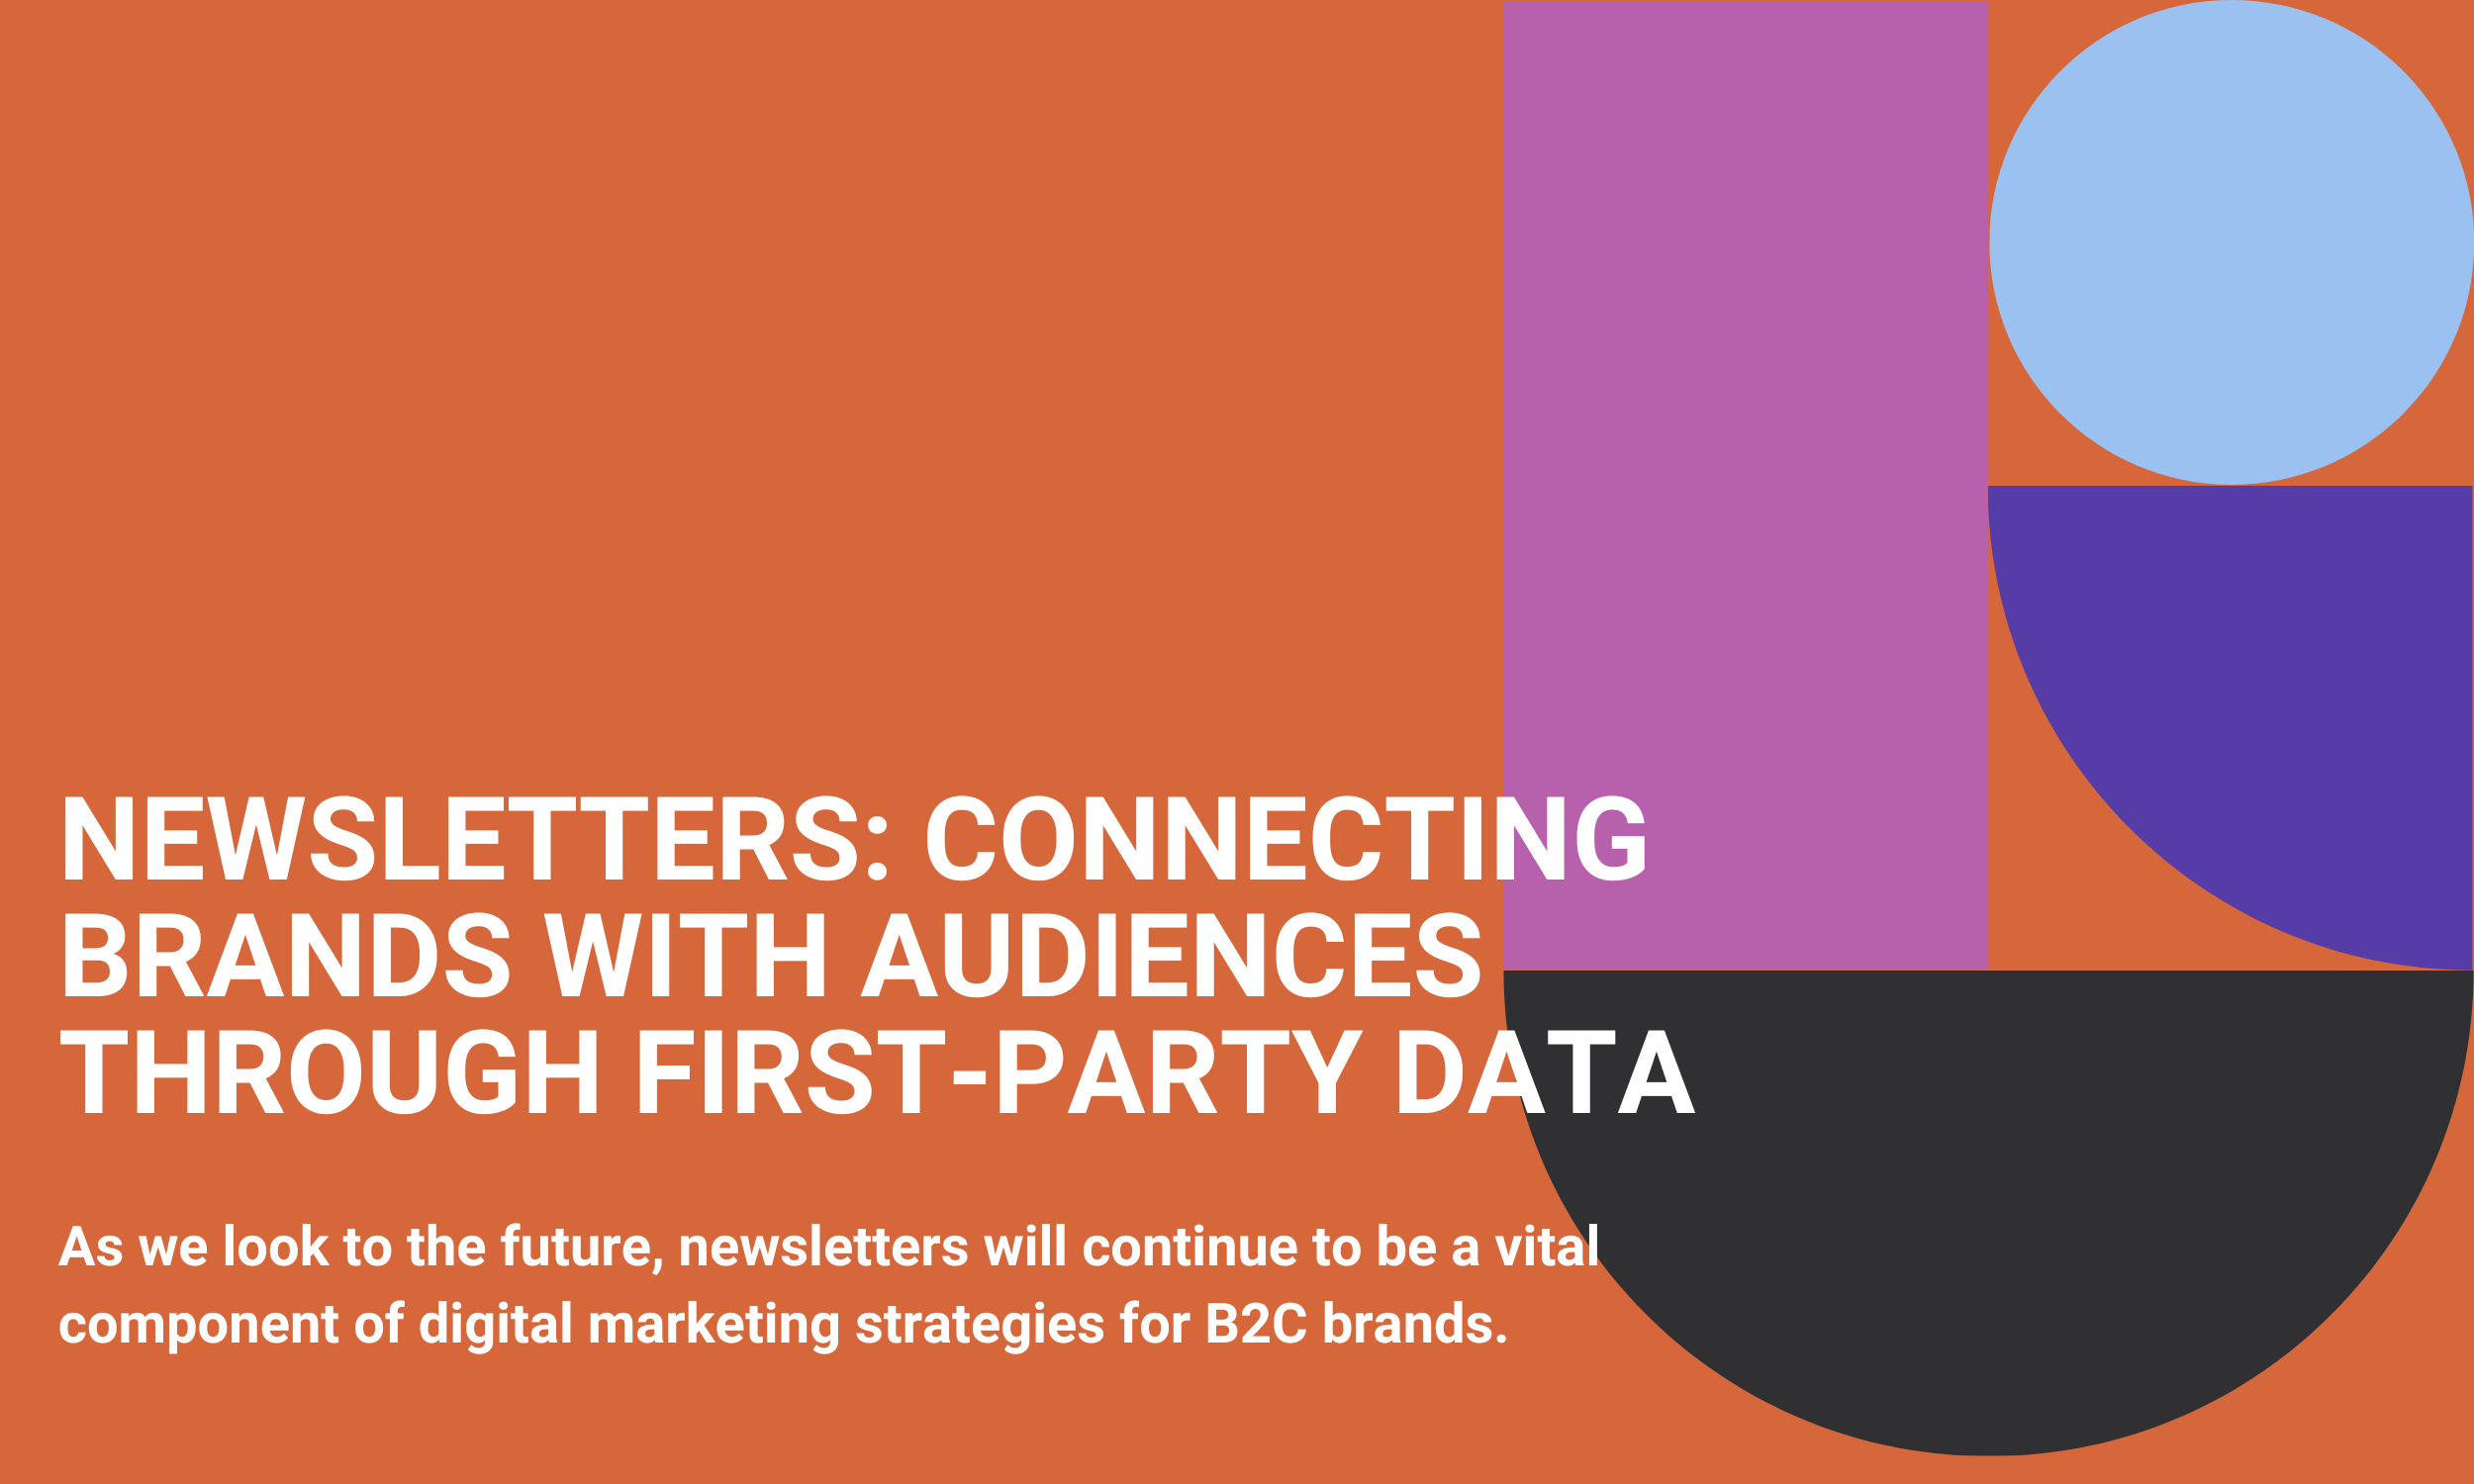 Newsletters: Connecting Brands with Audiences through First-Party Data